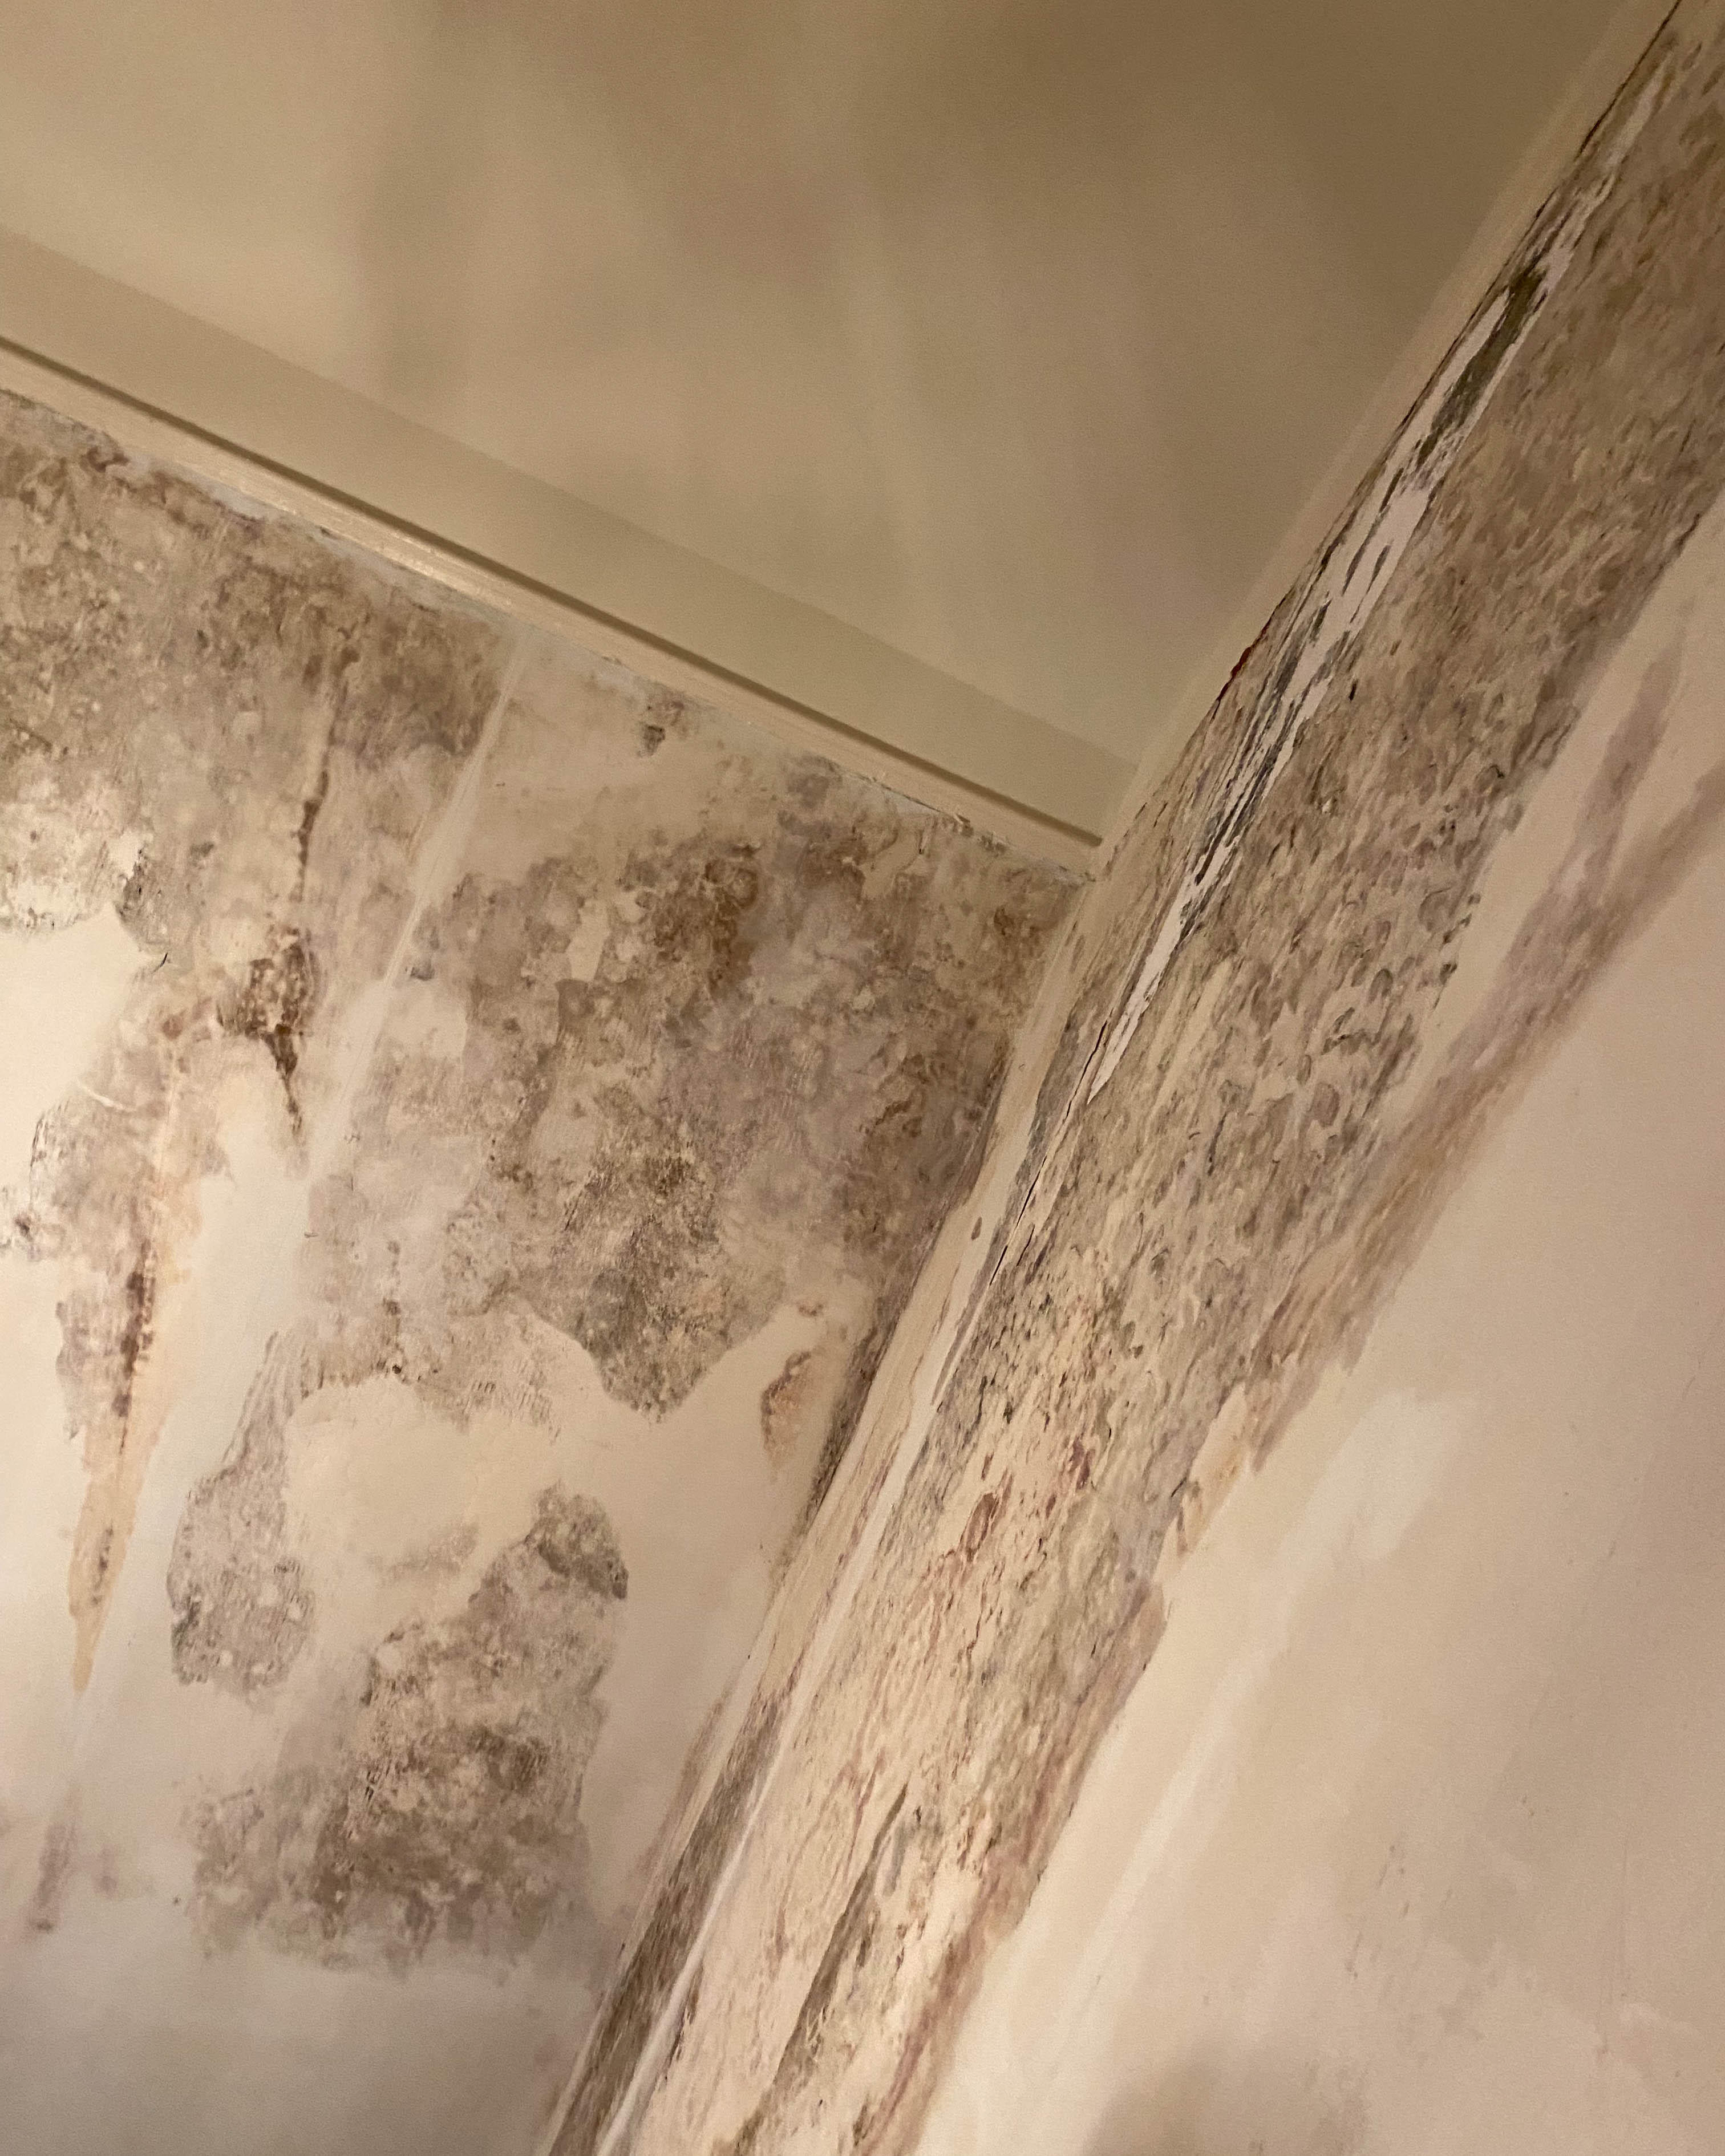 It's possible to discover mold in unexpected places after water damage. Mold will grow and spread if you ignore it. Rely on SERVPRO of Arnold/North Jefferson County for all of your mold damage cleanup and remediation needs in High Ridge, MO. Give us a call!